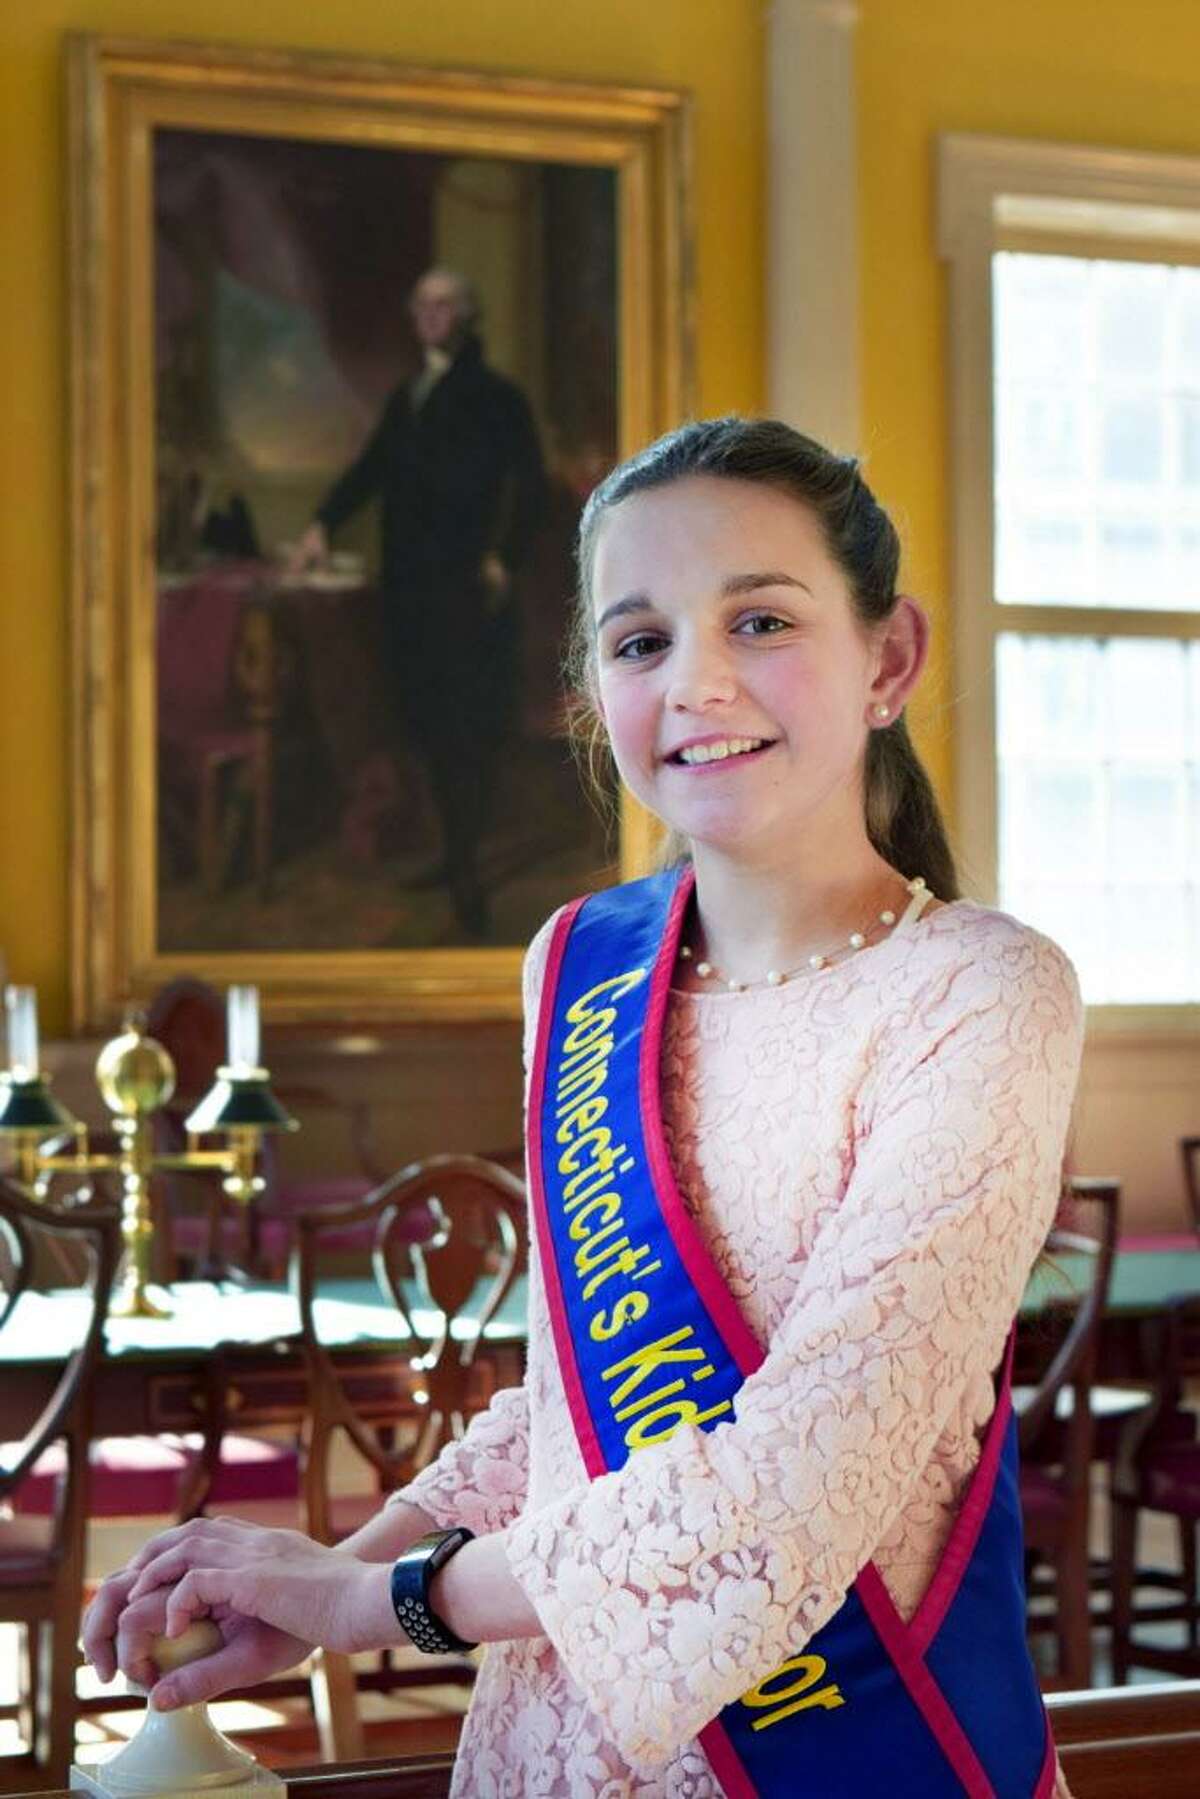 Megan Kasperowski from Brownstone Intermediate School in Portland was elected by fifth-graders statewide as the 2018 Connecticut’s Kid Governor.